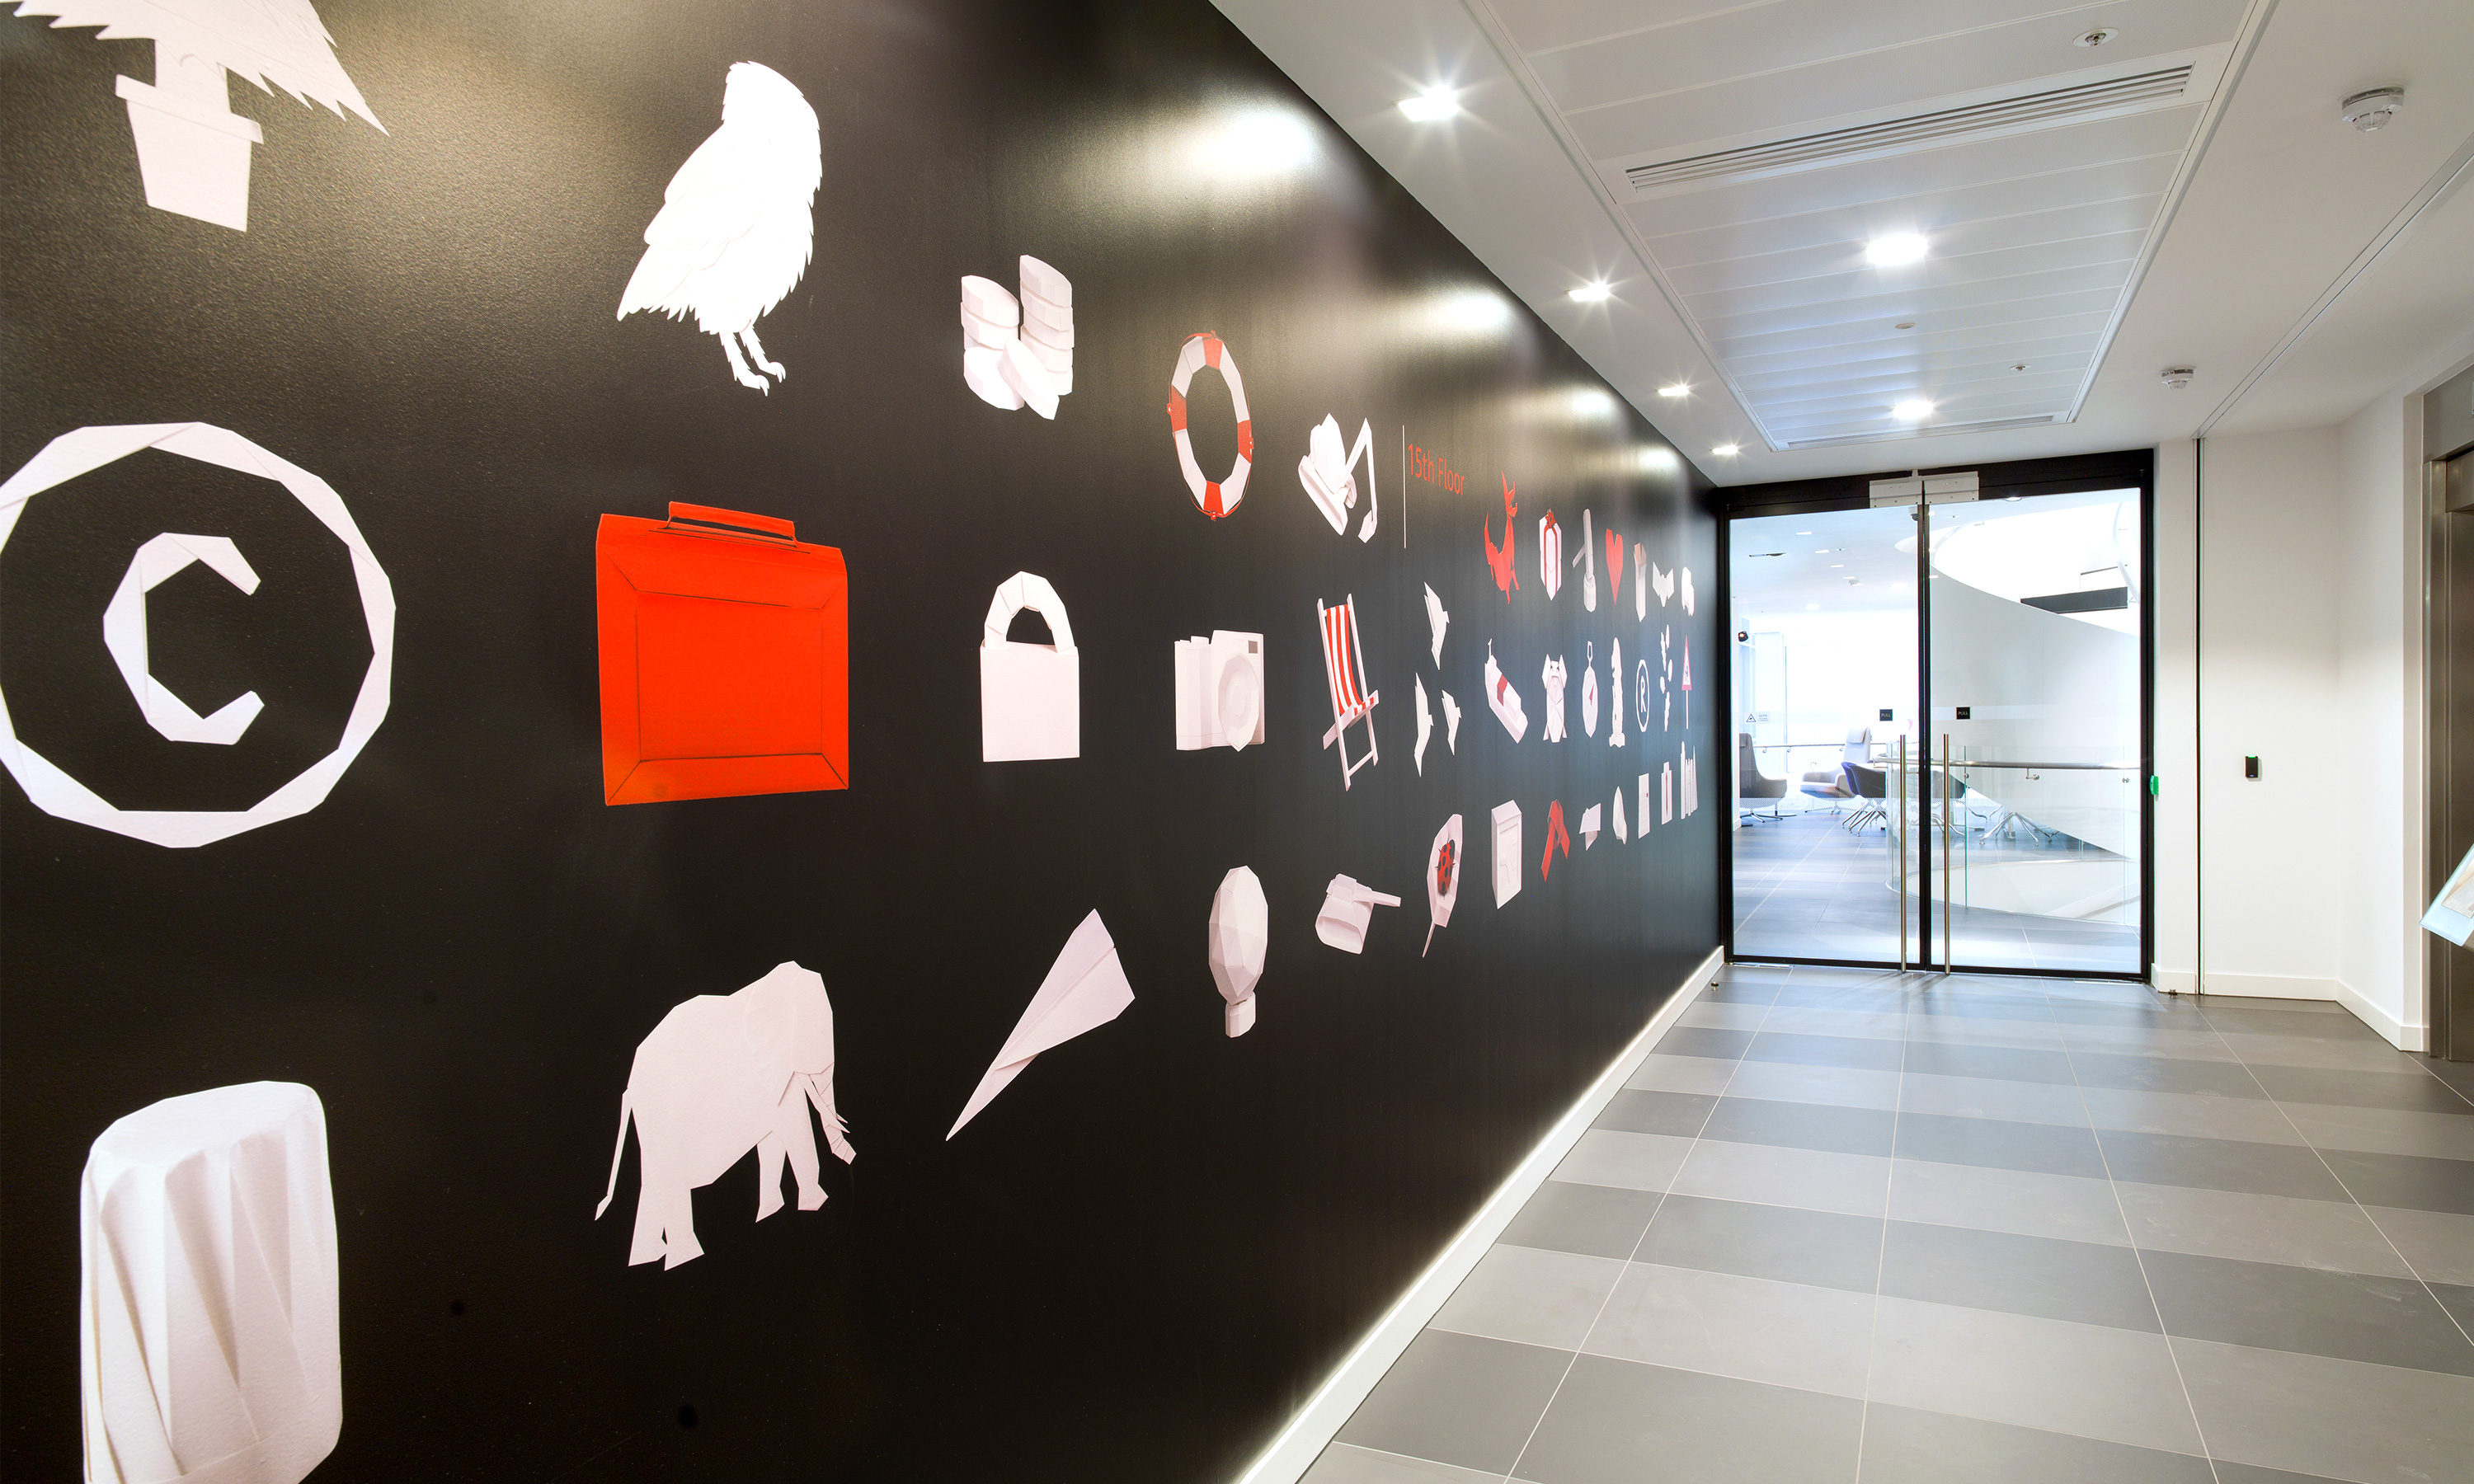 Branding by Neon - Nabarro Law Firm - Law sector branding - 125 London Wall Lift Lobby - origami gallery graphics designed by Dana Robertson